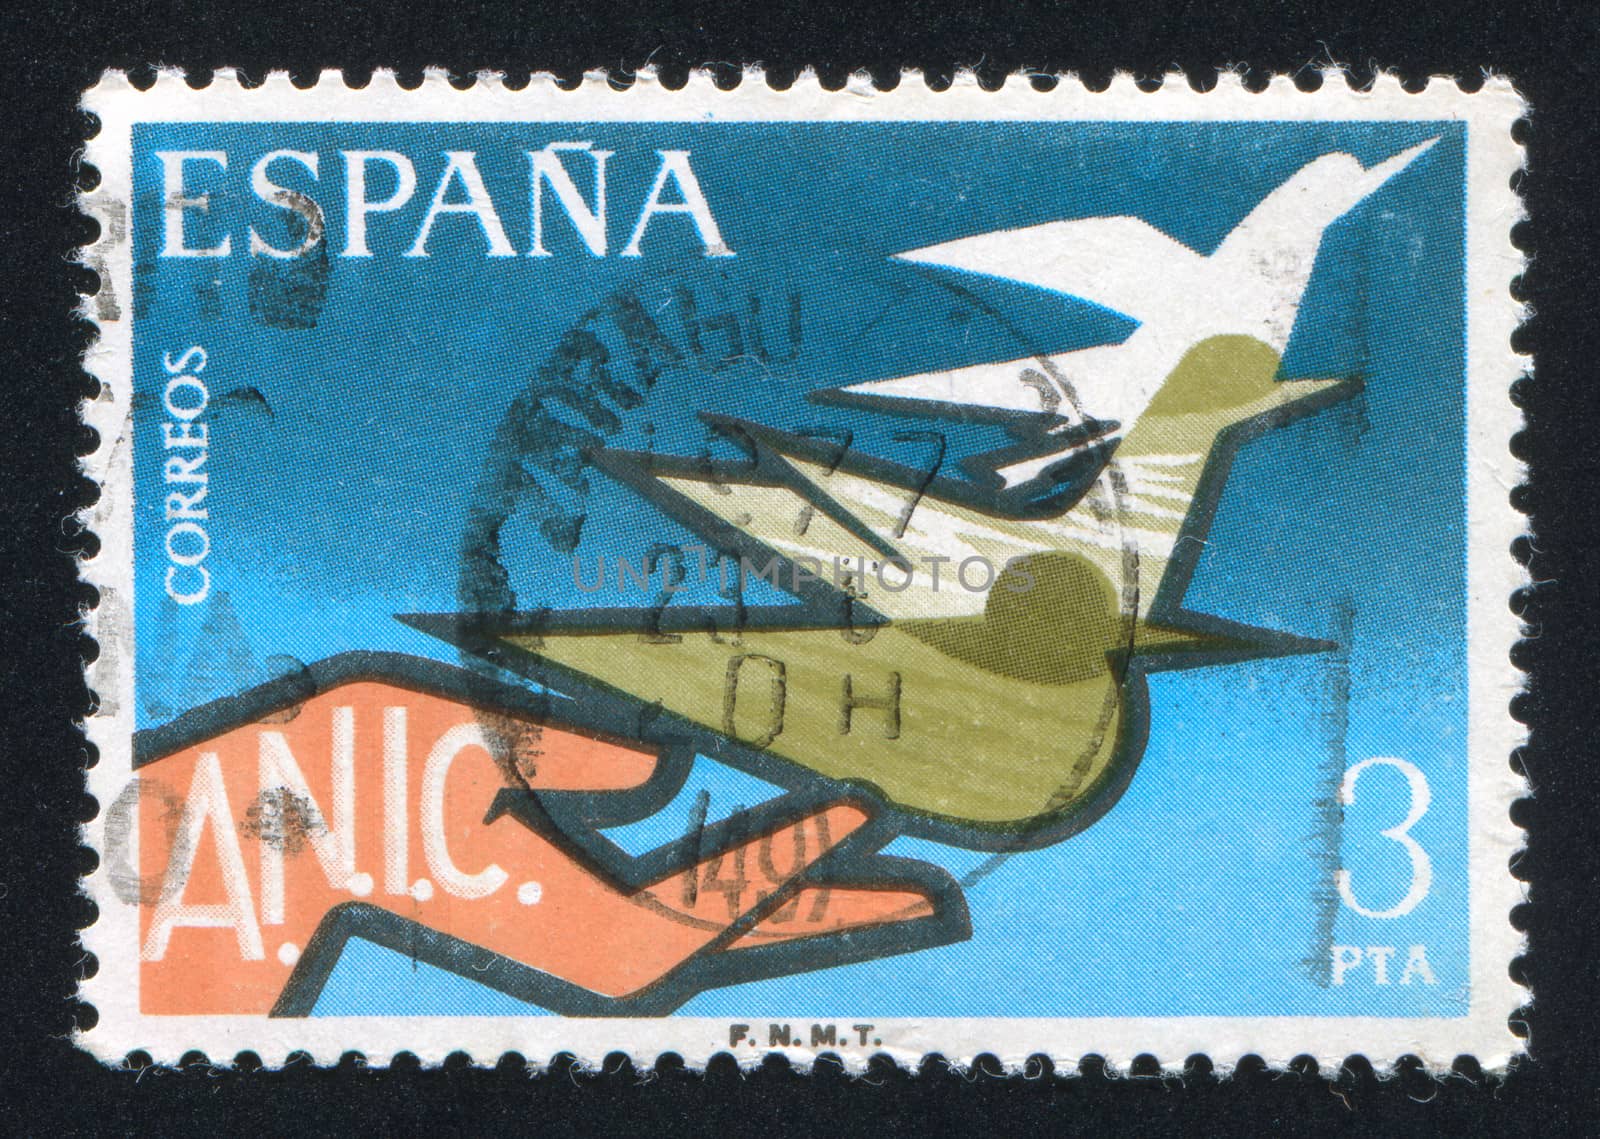 SPAIN - CIRCA 1976: stamp printed by Spain, shows Hand Releasing Doves, circa 1976